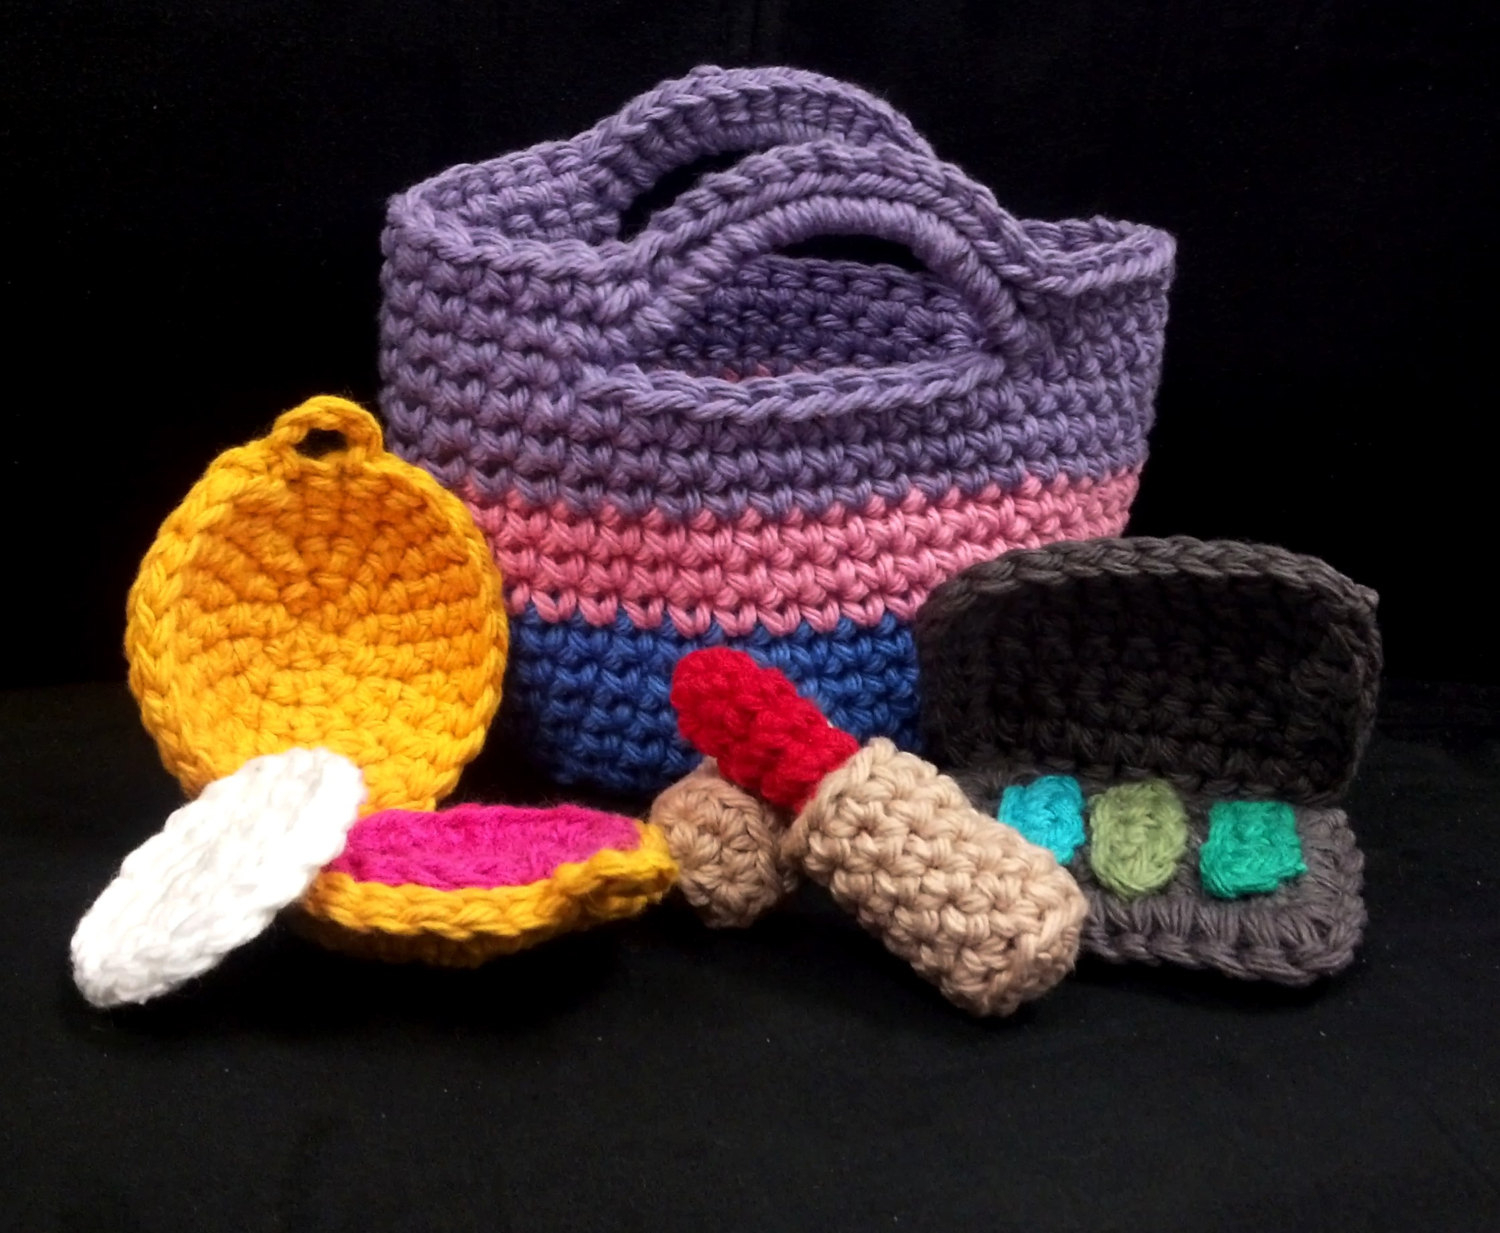 Unusual Crochet Patterns Amigurumi Crochet Pattern Quick And Easy Make Up And Bag Etsy